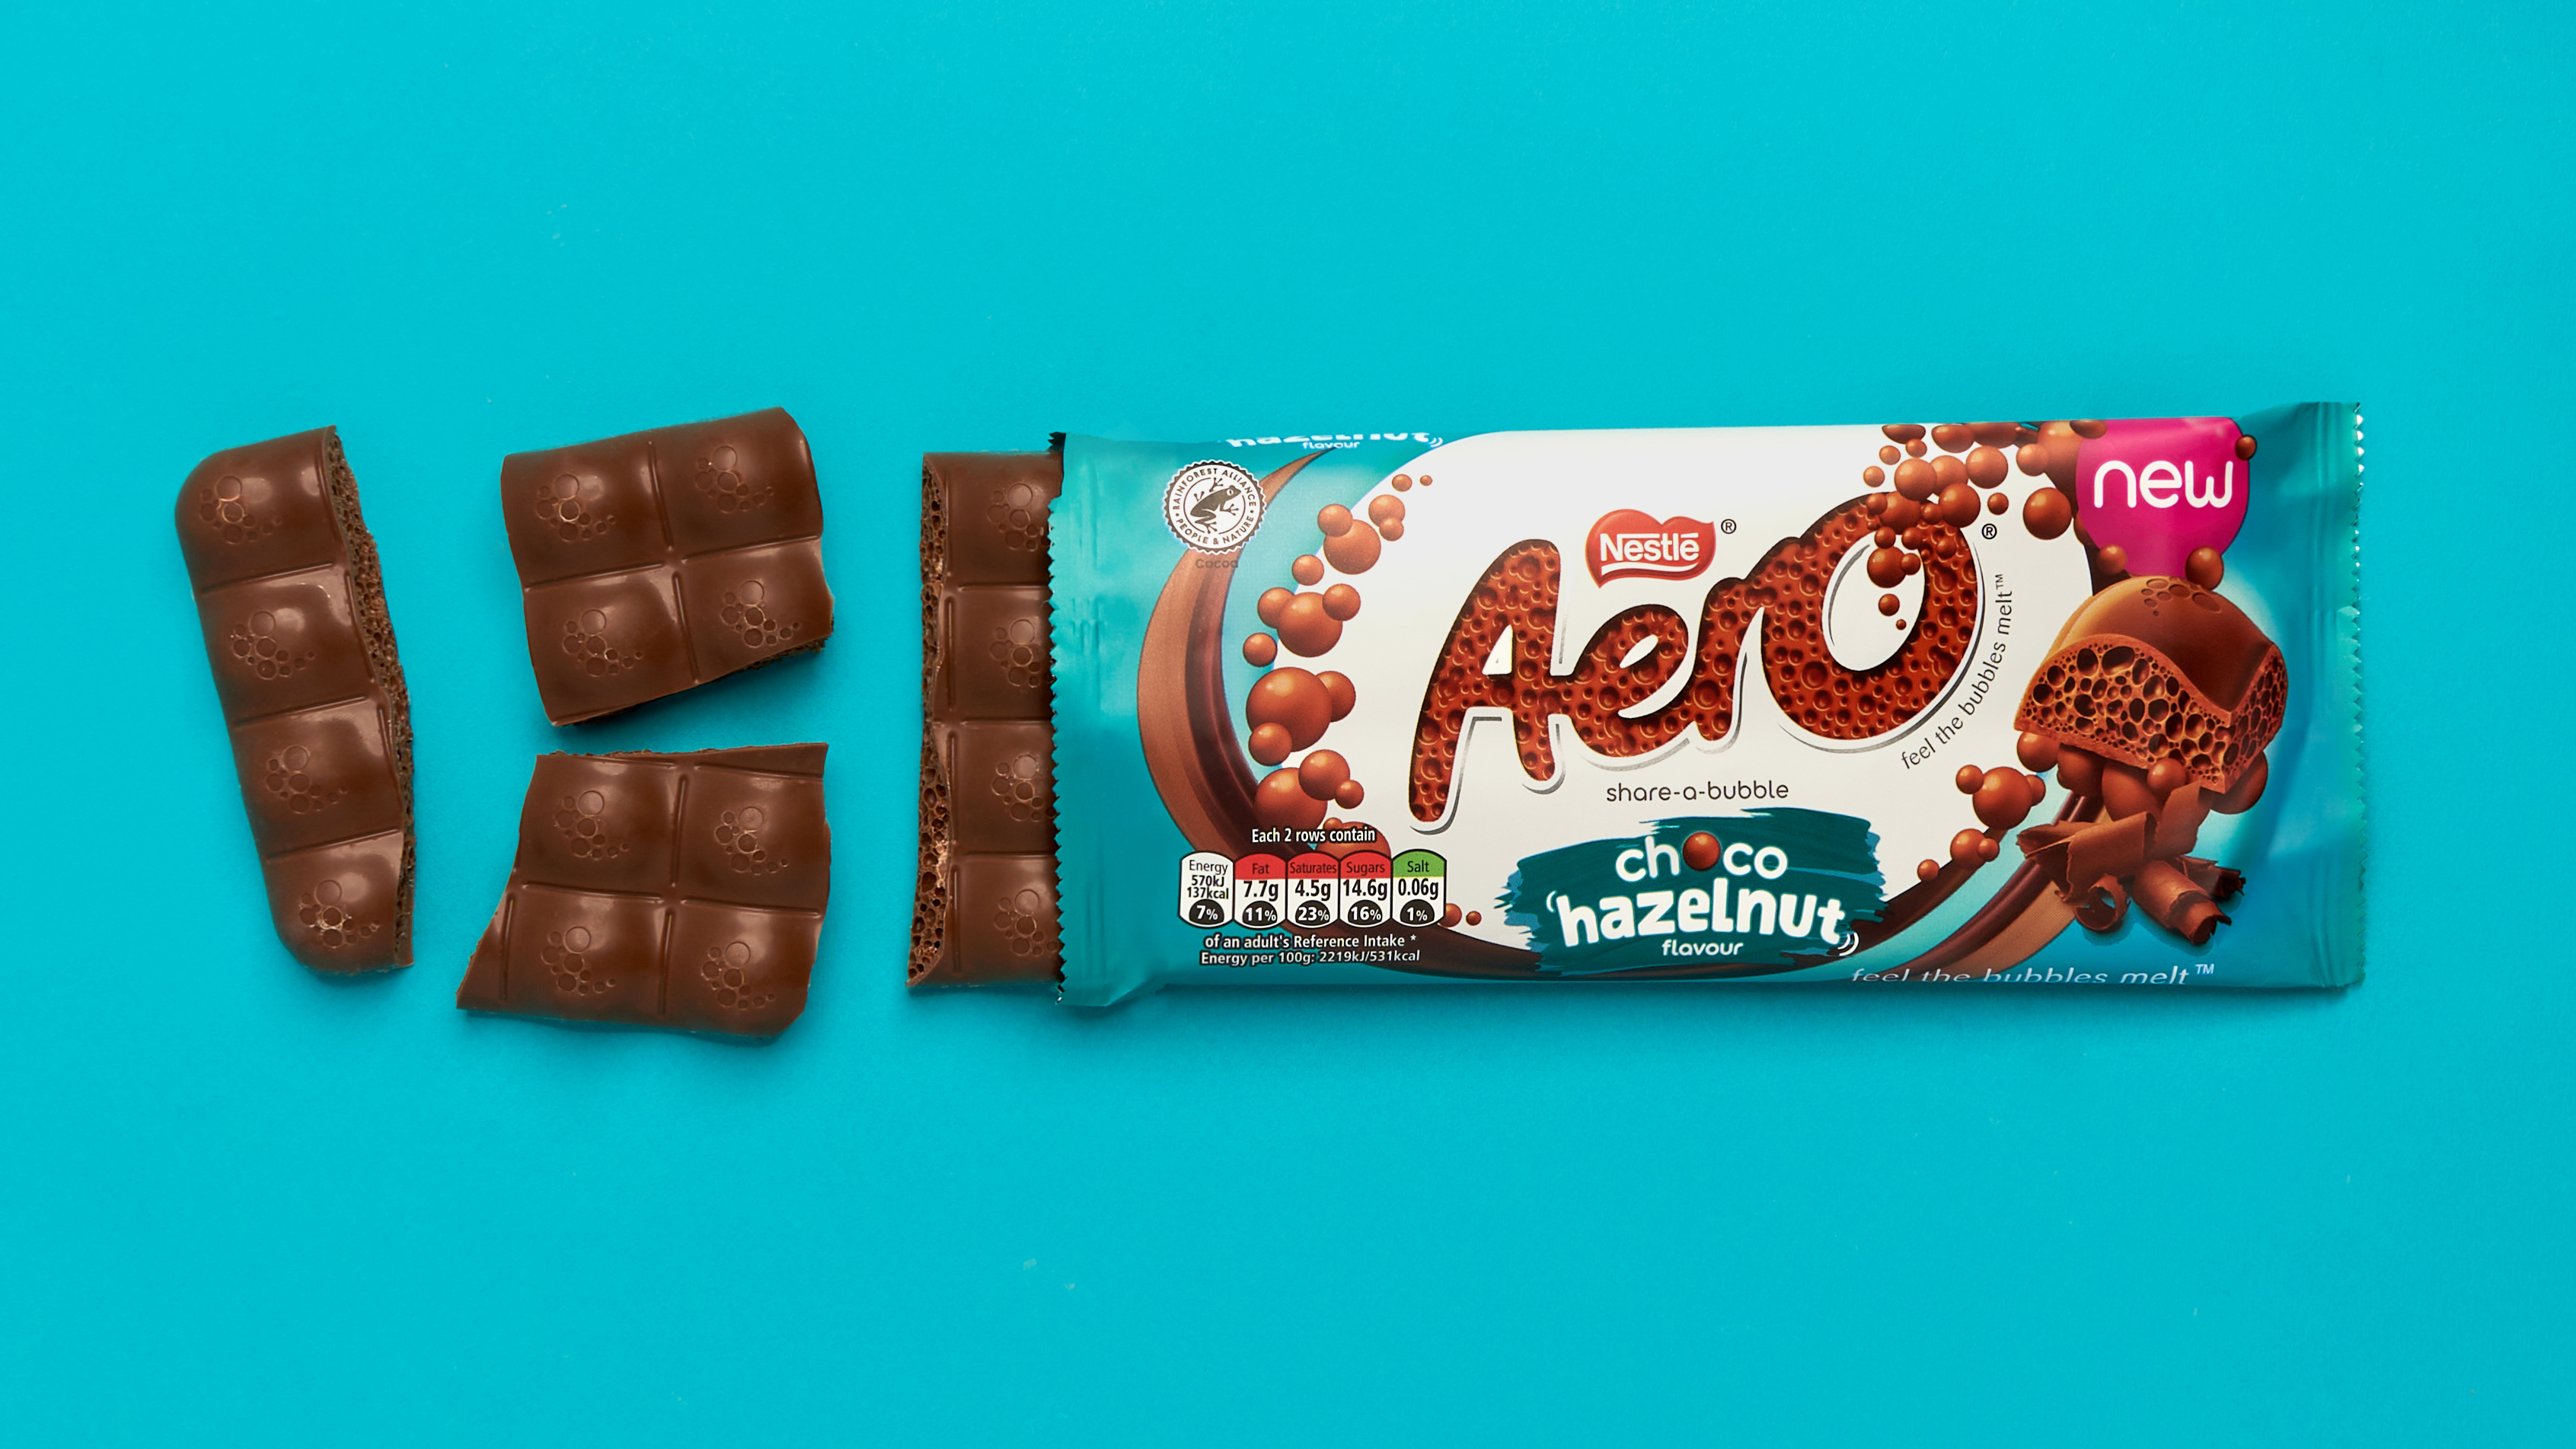 Sections of an Aero chocolate bar peeking out of an Aero choco-hazelnut flavour bar on a teal background.